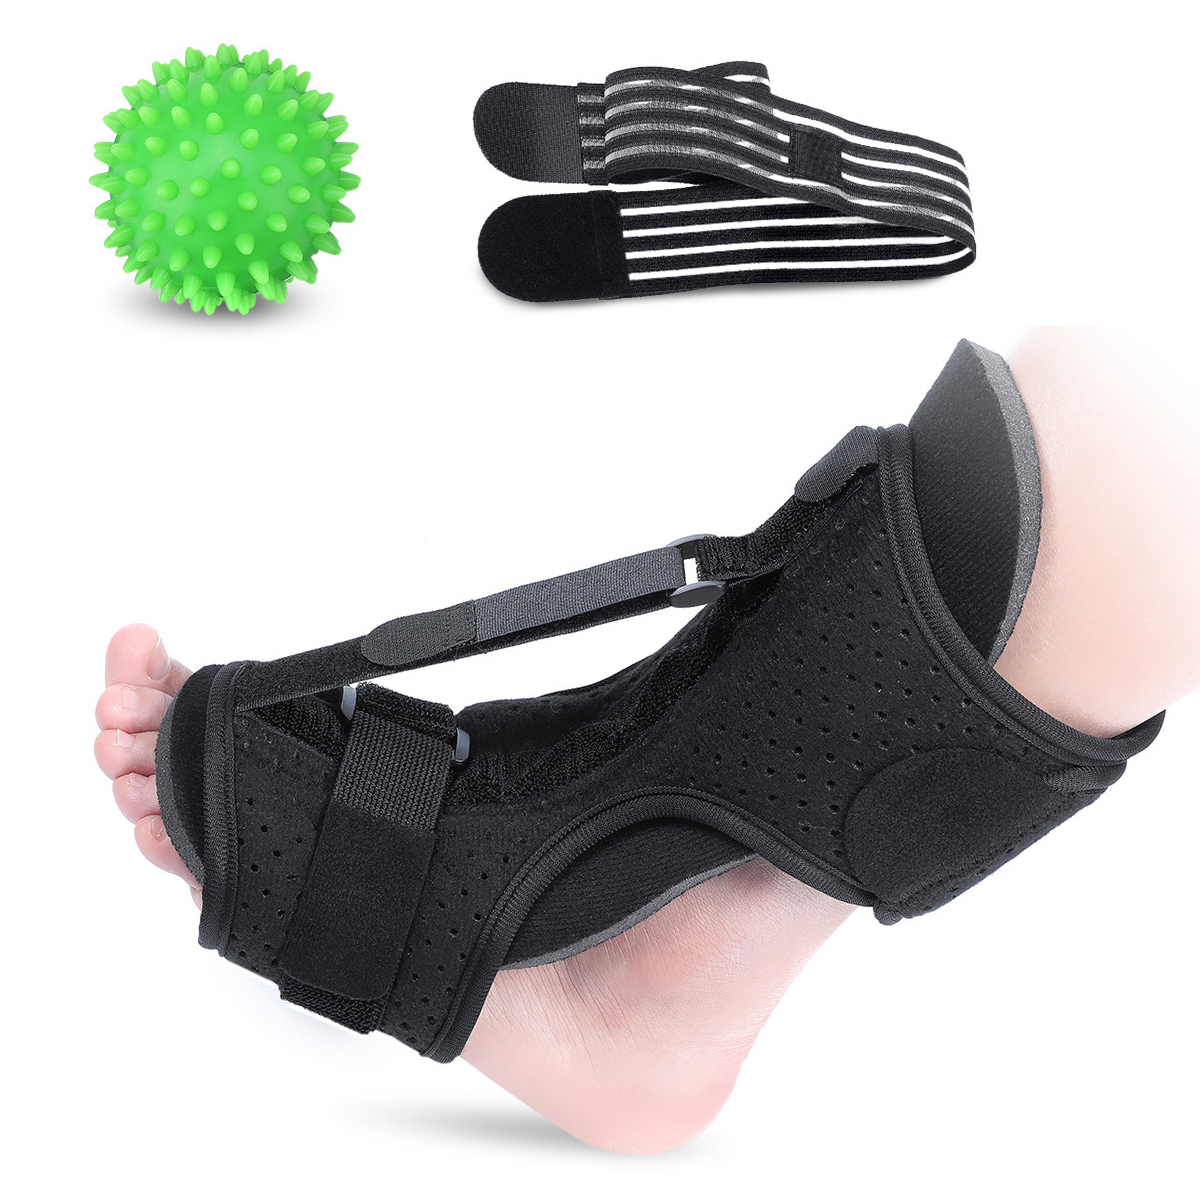 OUTERDO-Foot-Drop-Orthosis-with-Fitness-Ball-Adjustable-Plantar-Fasciitis-Night-Splint-Brace-Support-1891293-1